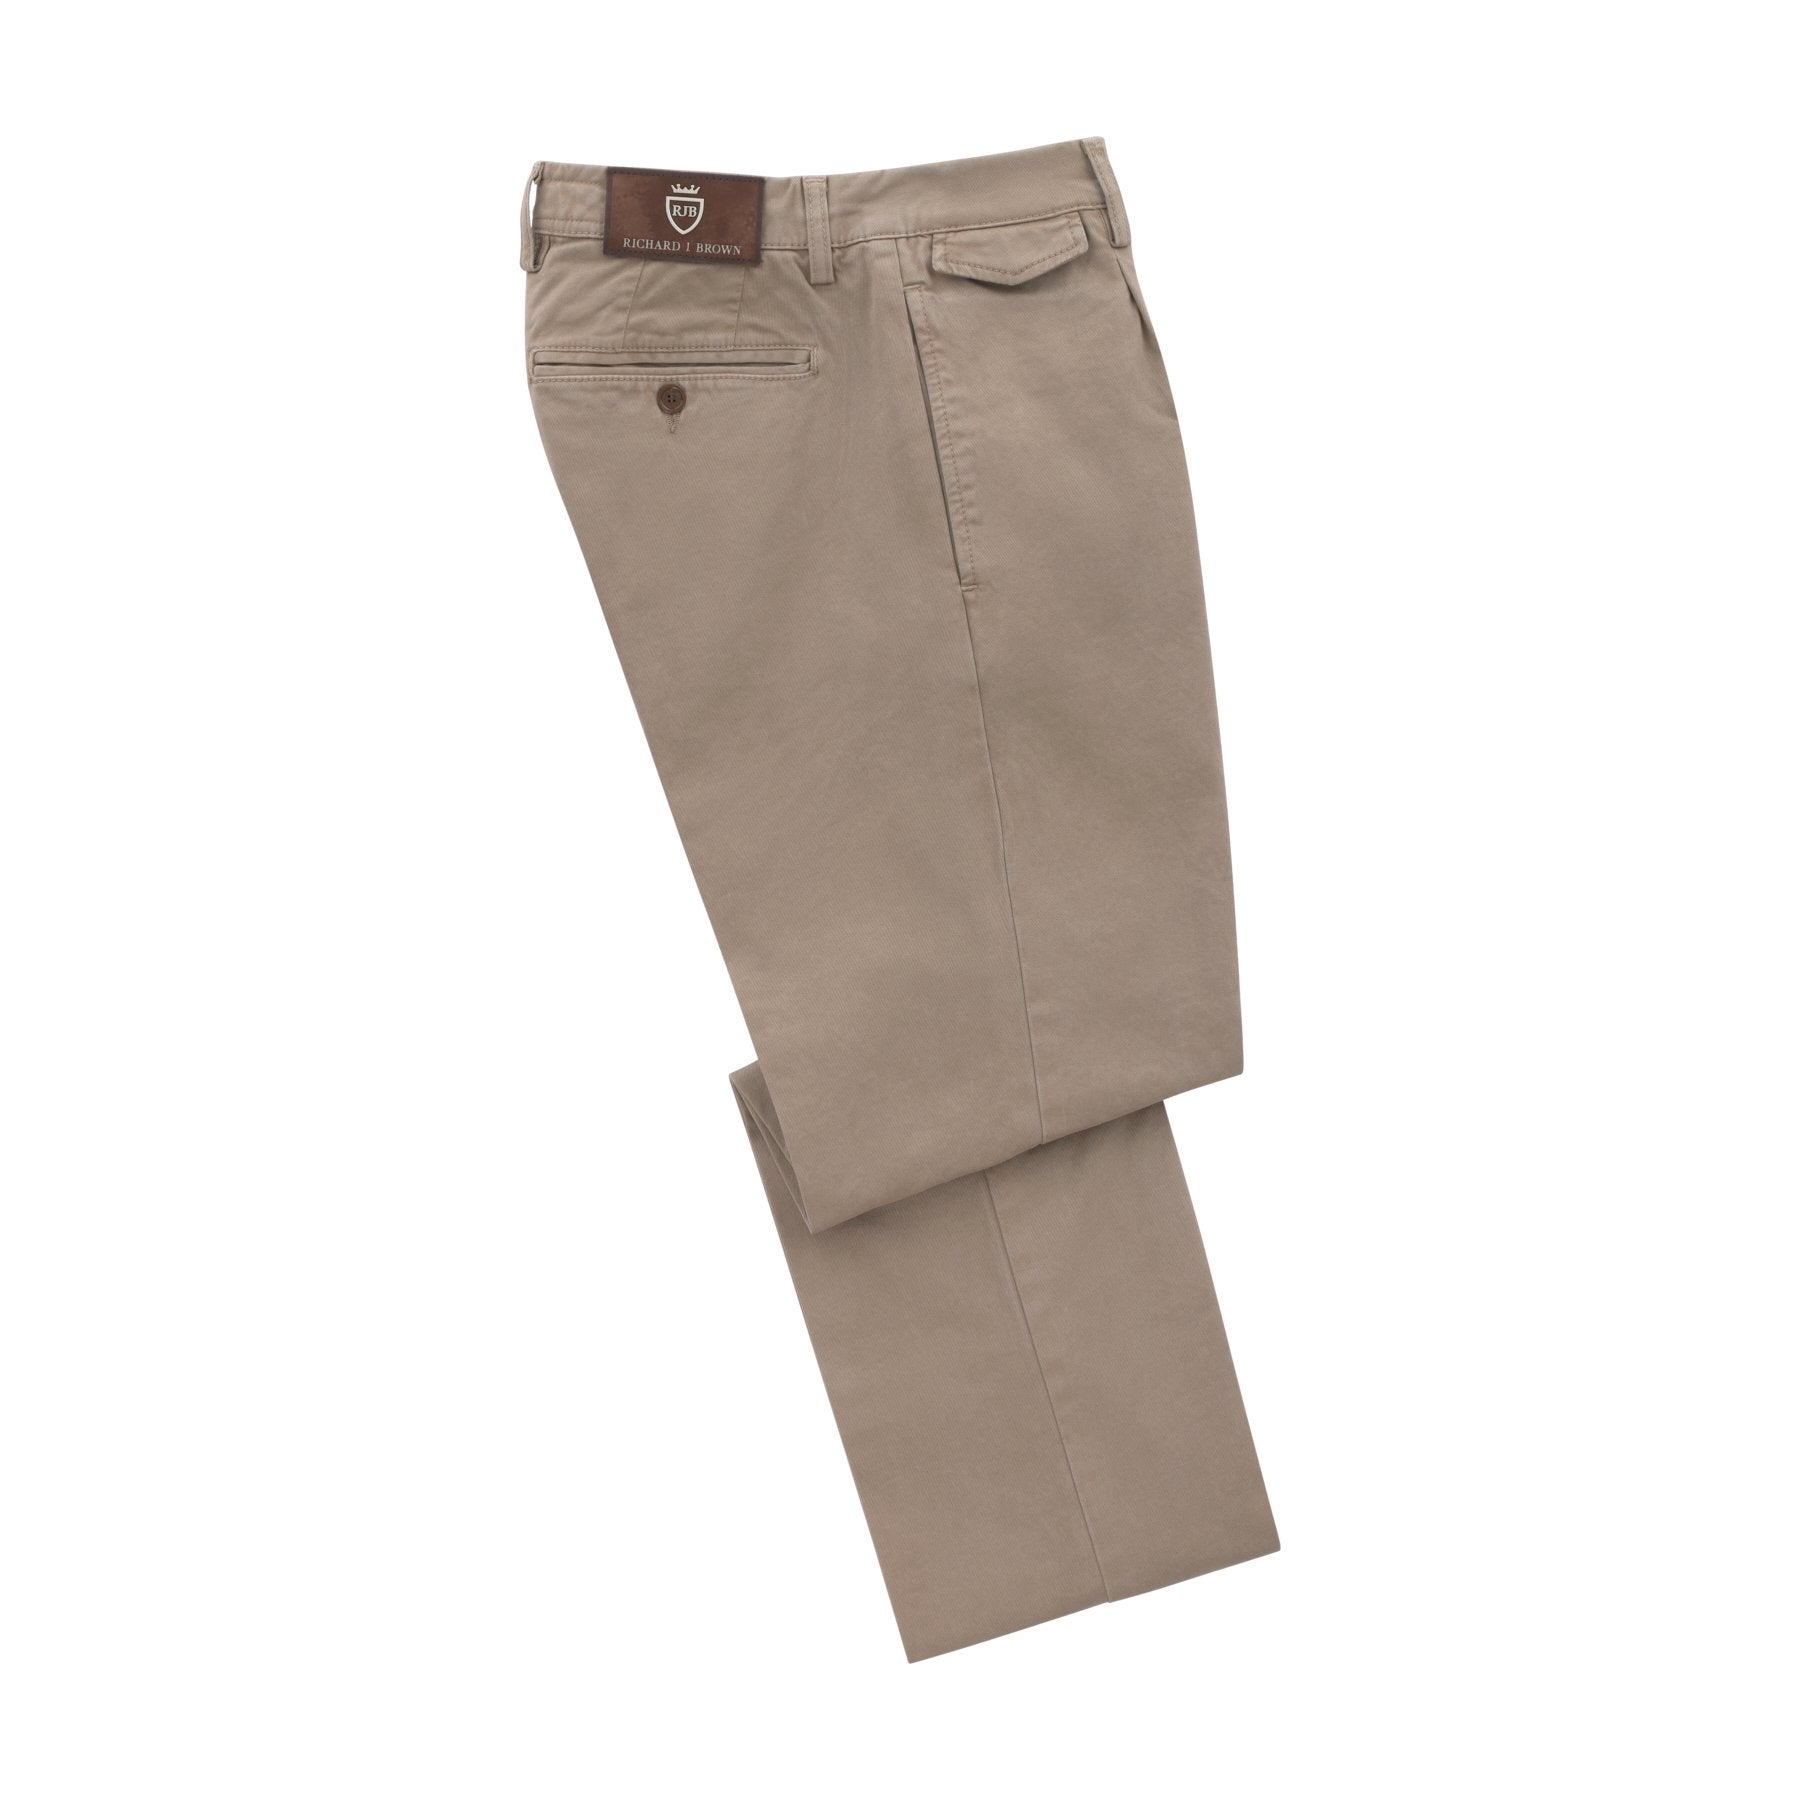 Buy Web Jeans Light Brown Cotton Slim Fit Trousers for Men at Amazon.in